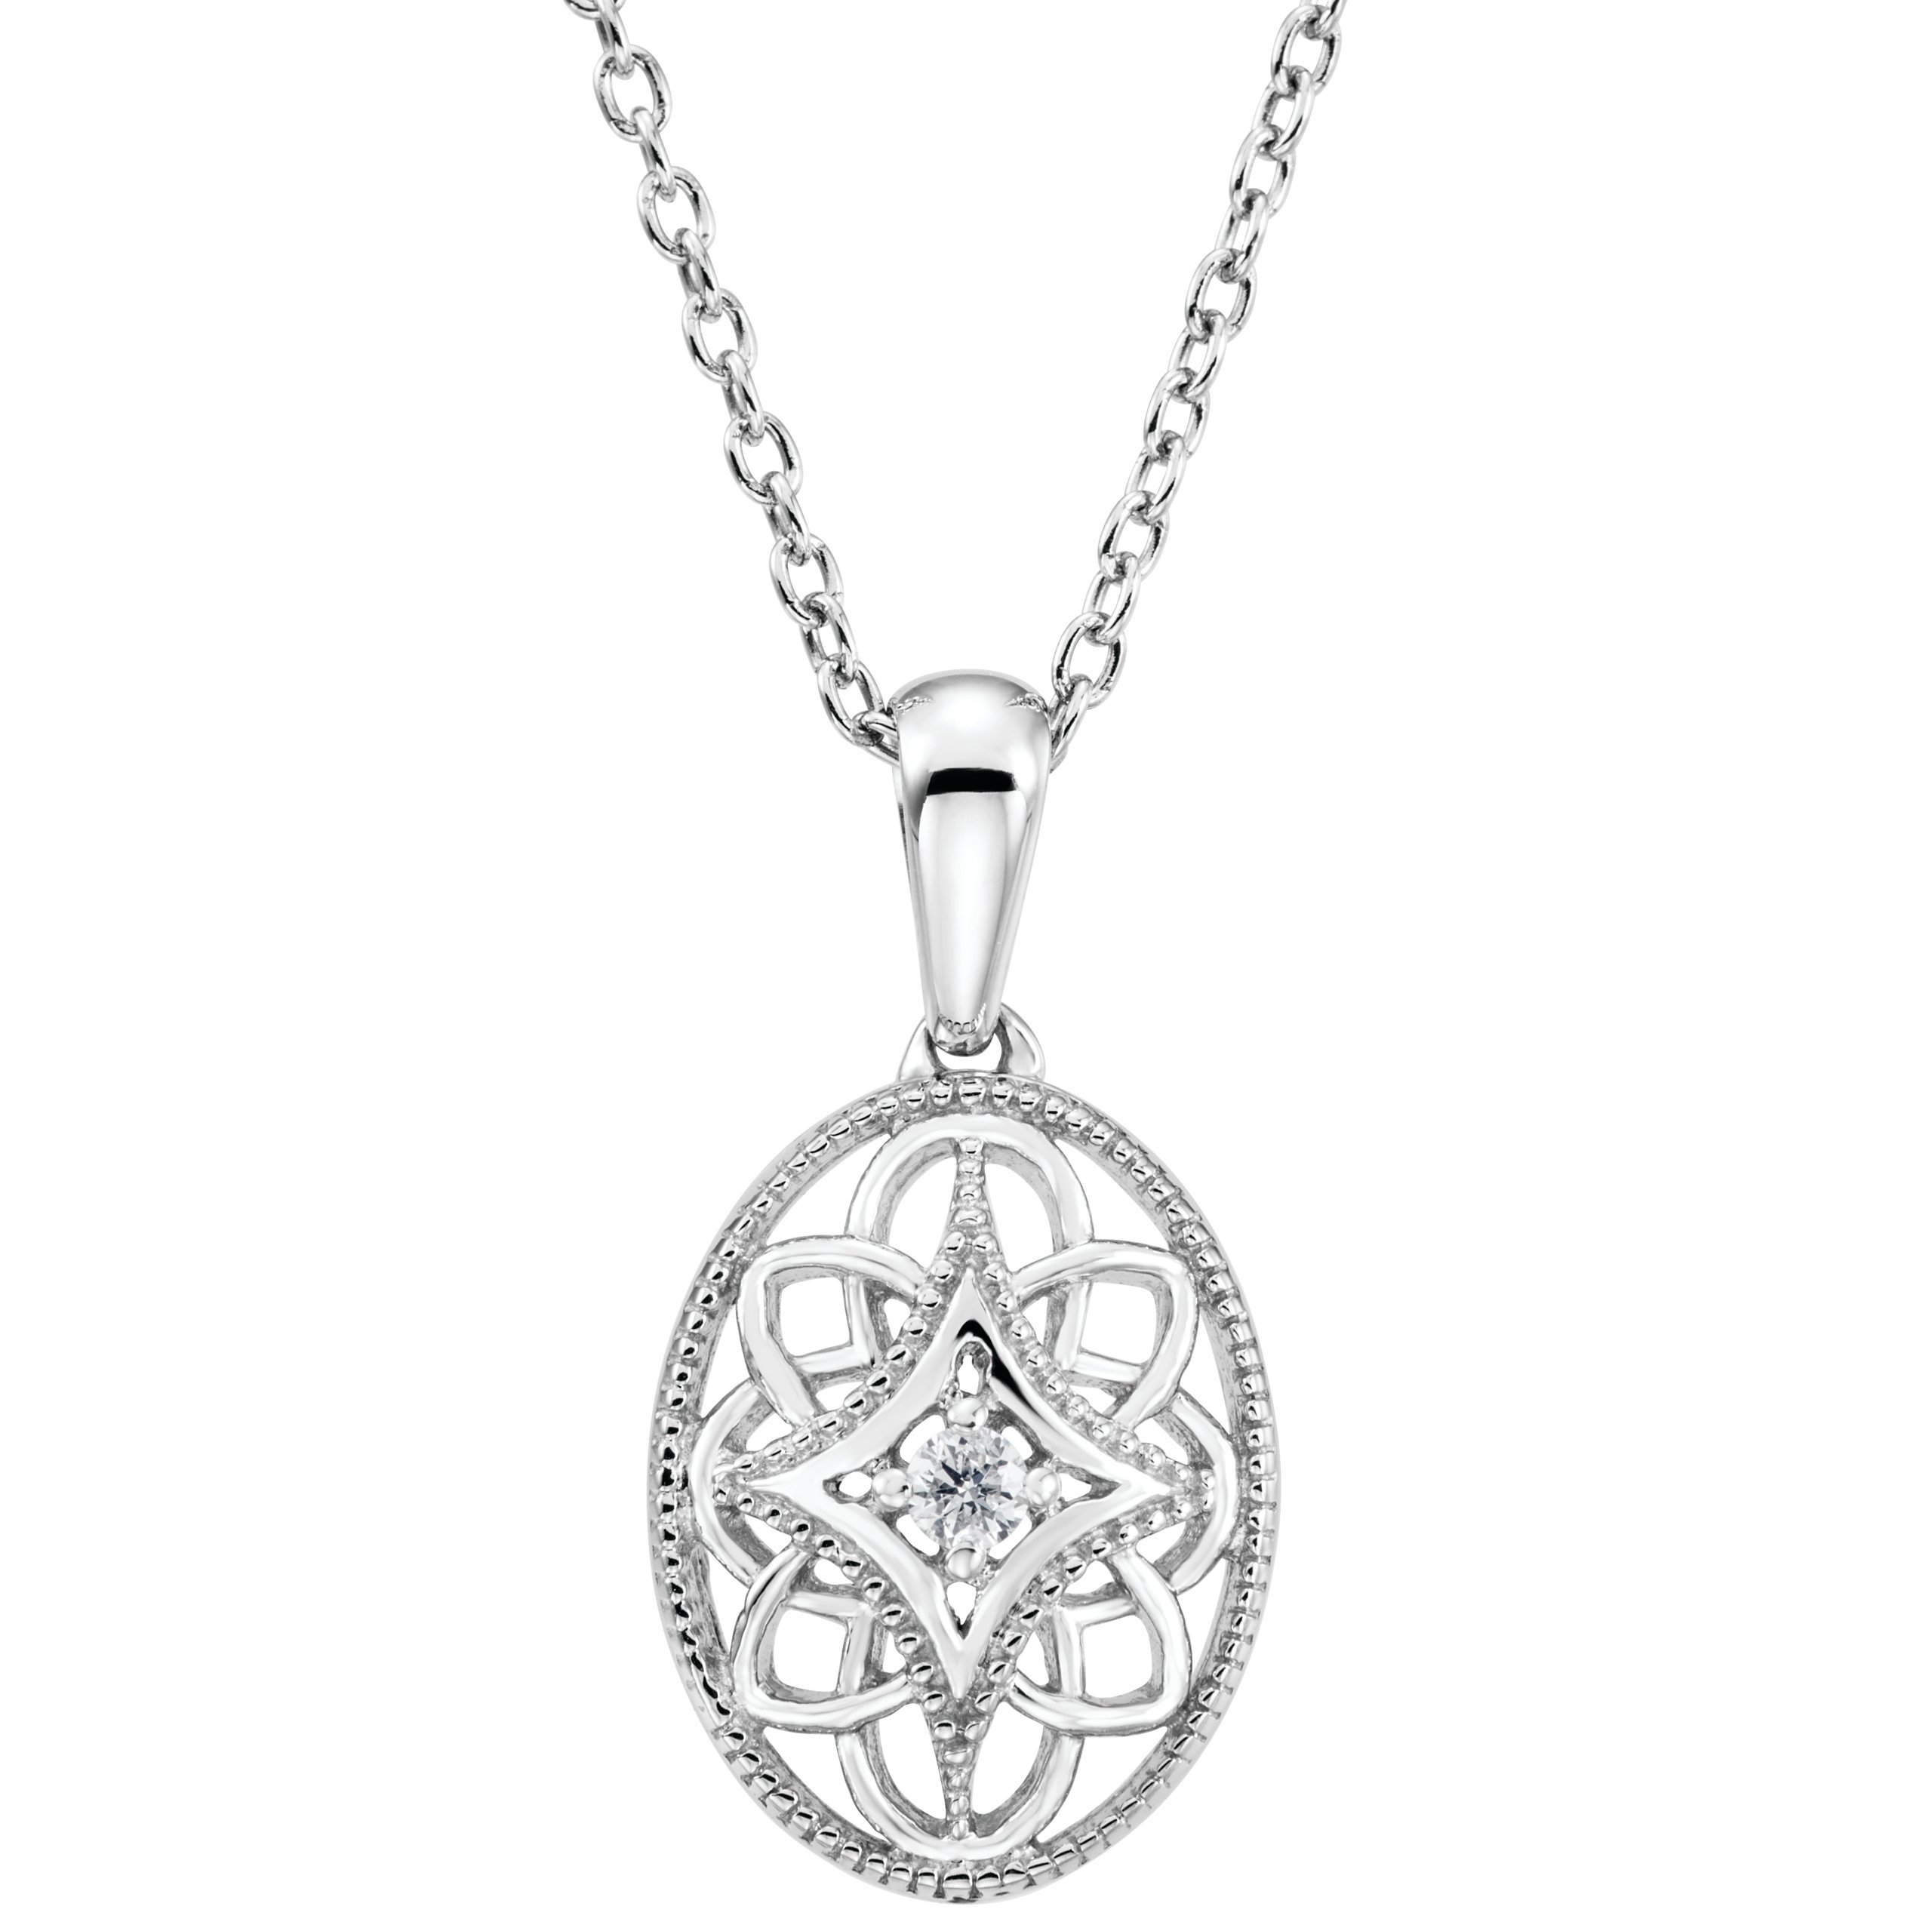 Sterling Silver .03 CT Diamond 18 inch Necklace Ref. 2995184